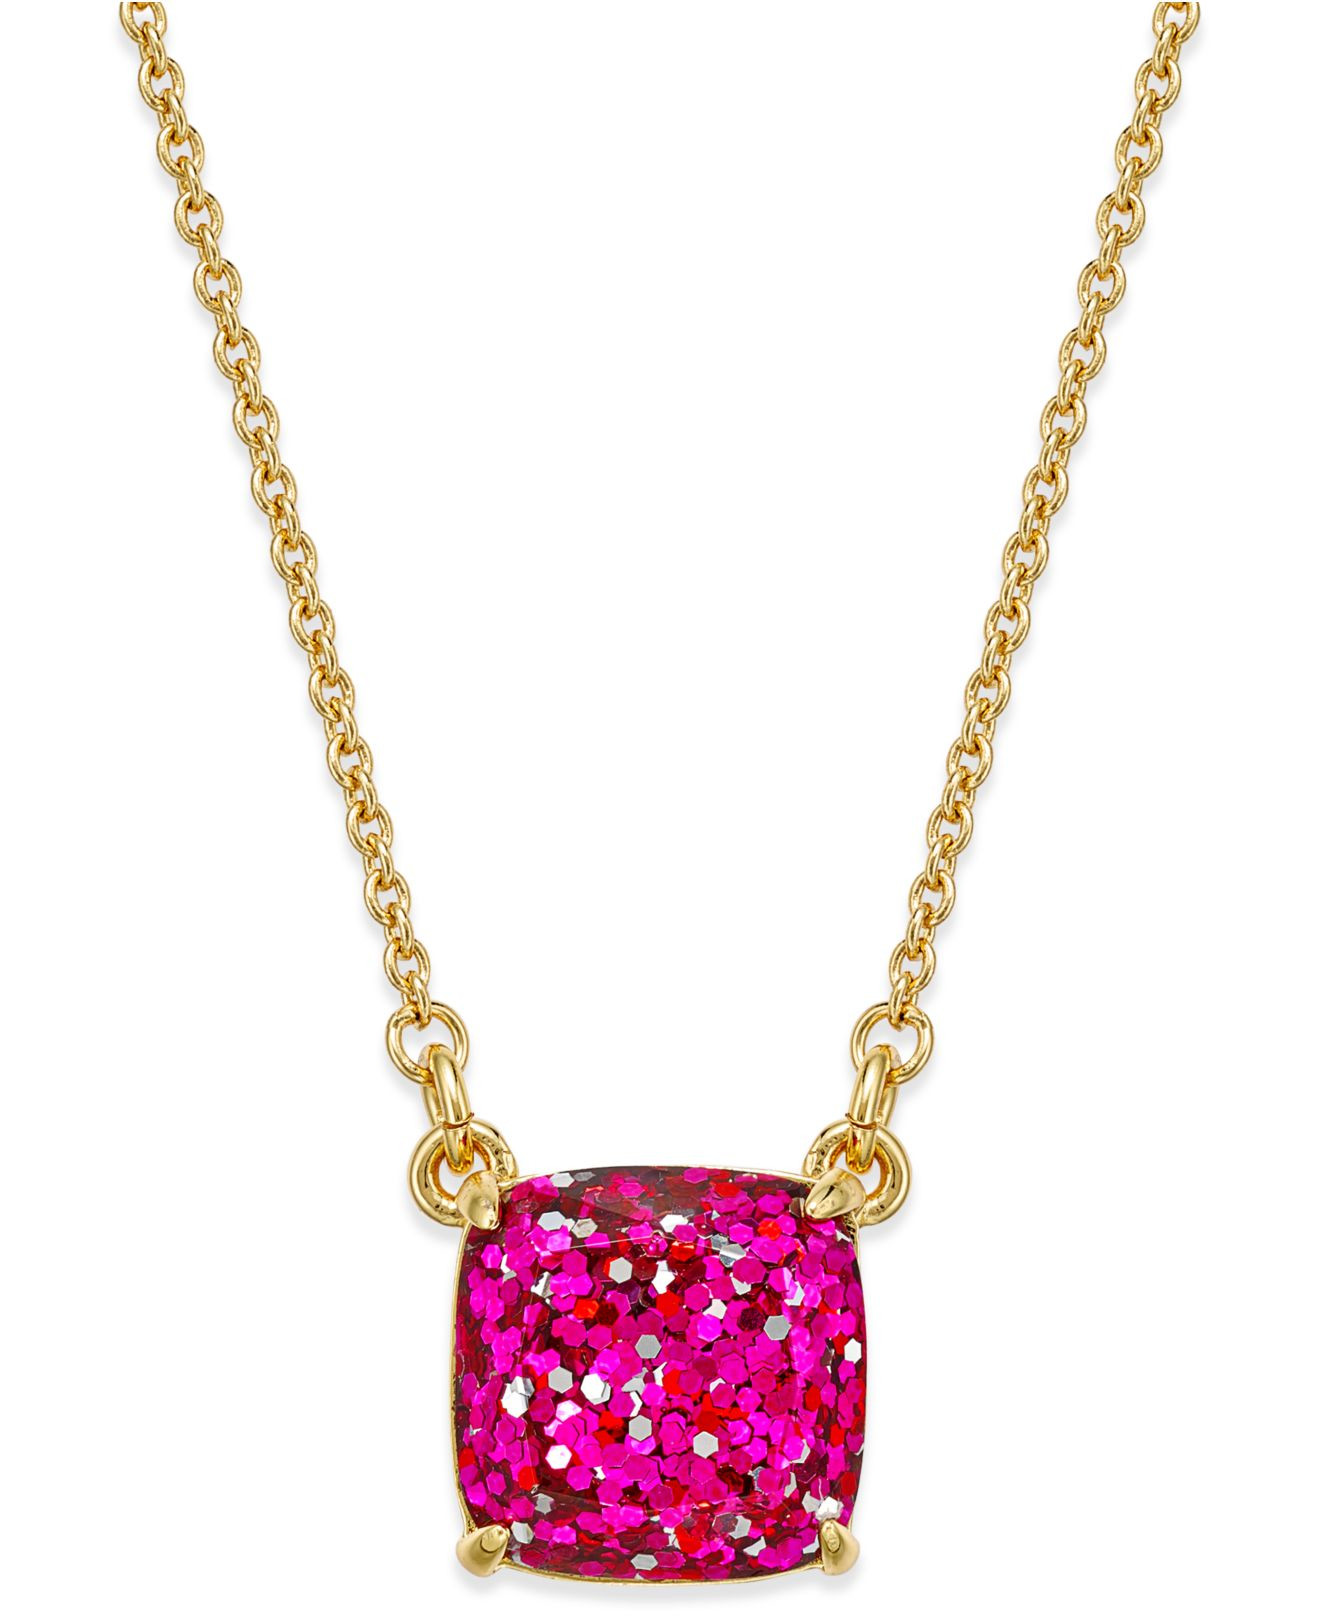 Kate Spade Necklaces
 Lyst Kate Spade New York 12k Gold plated Pink Glitter